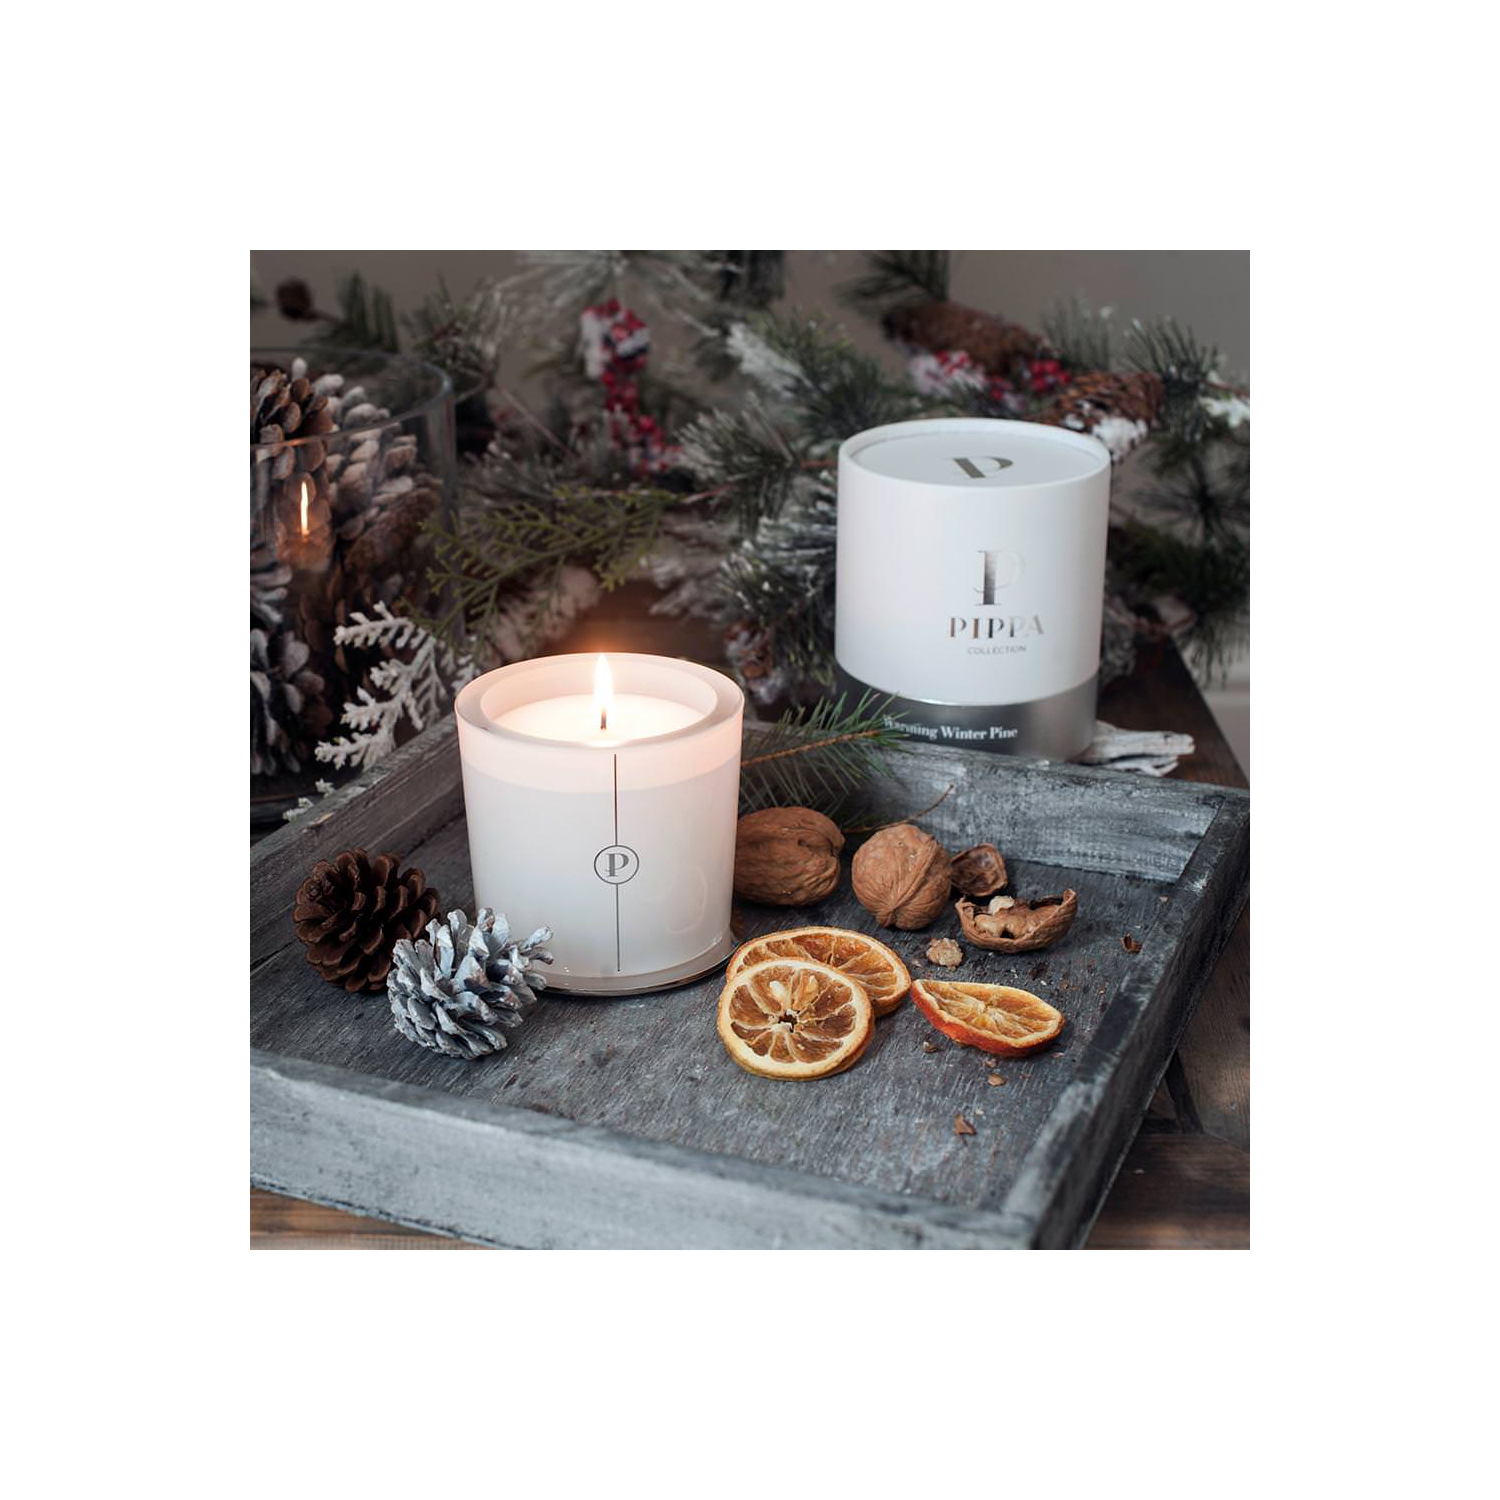 Warming Winter Pine Candle